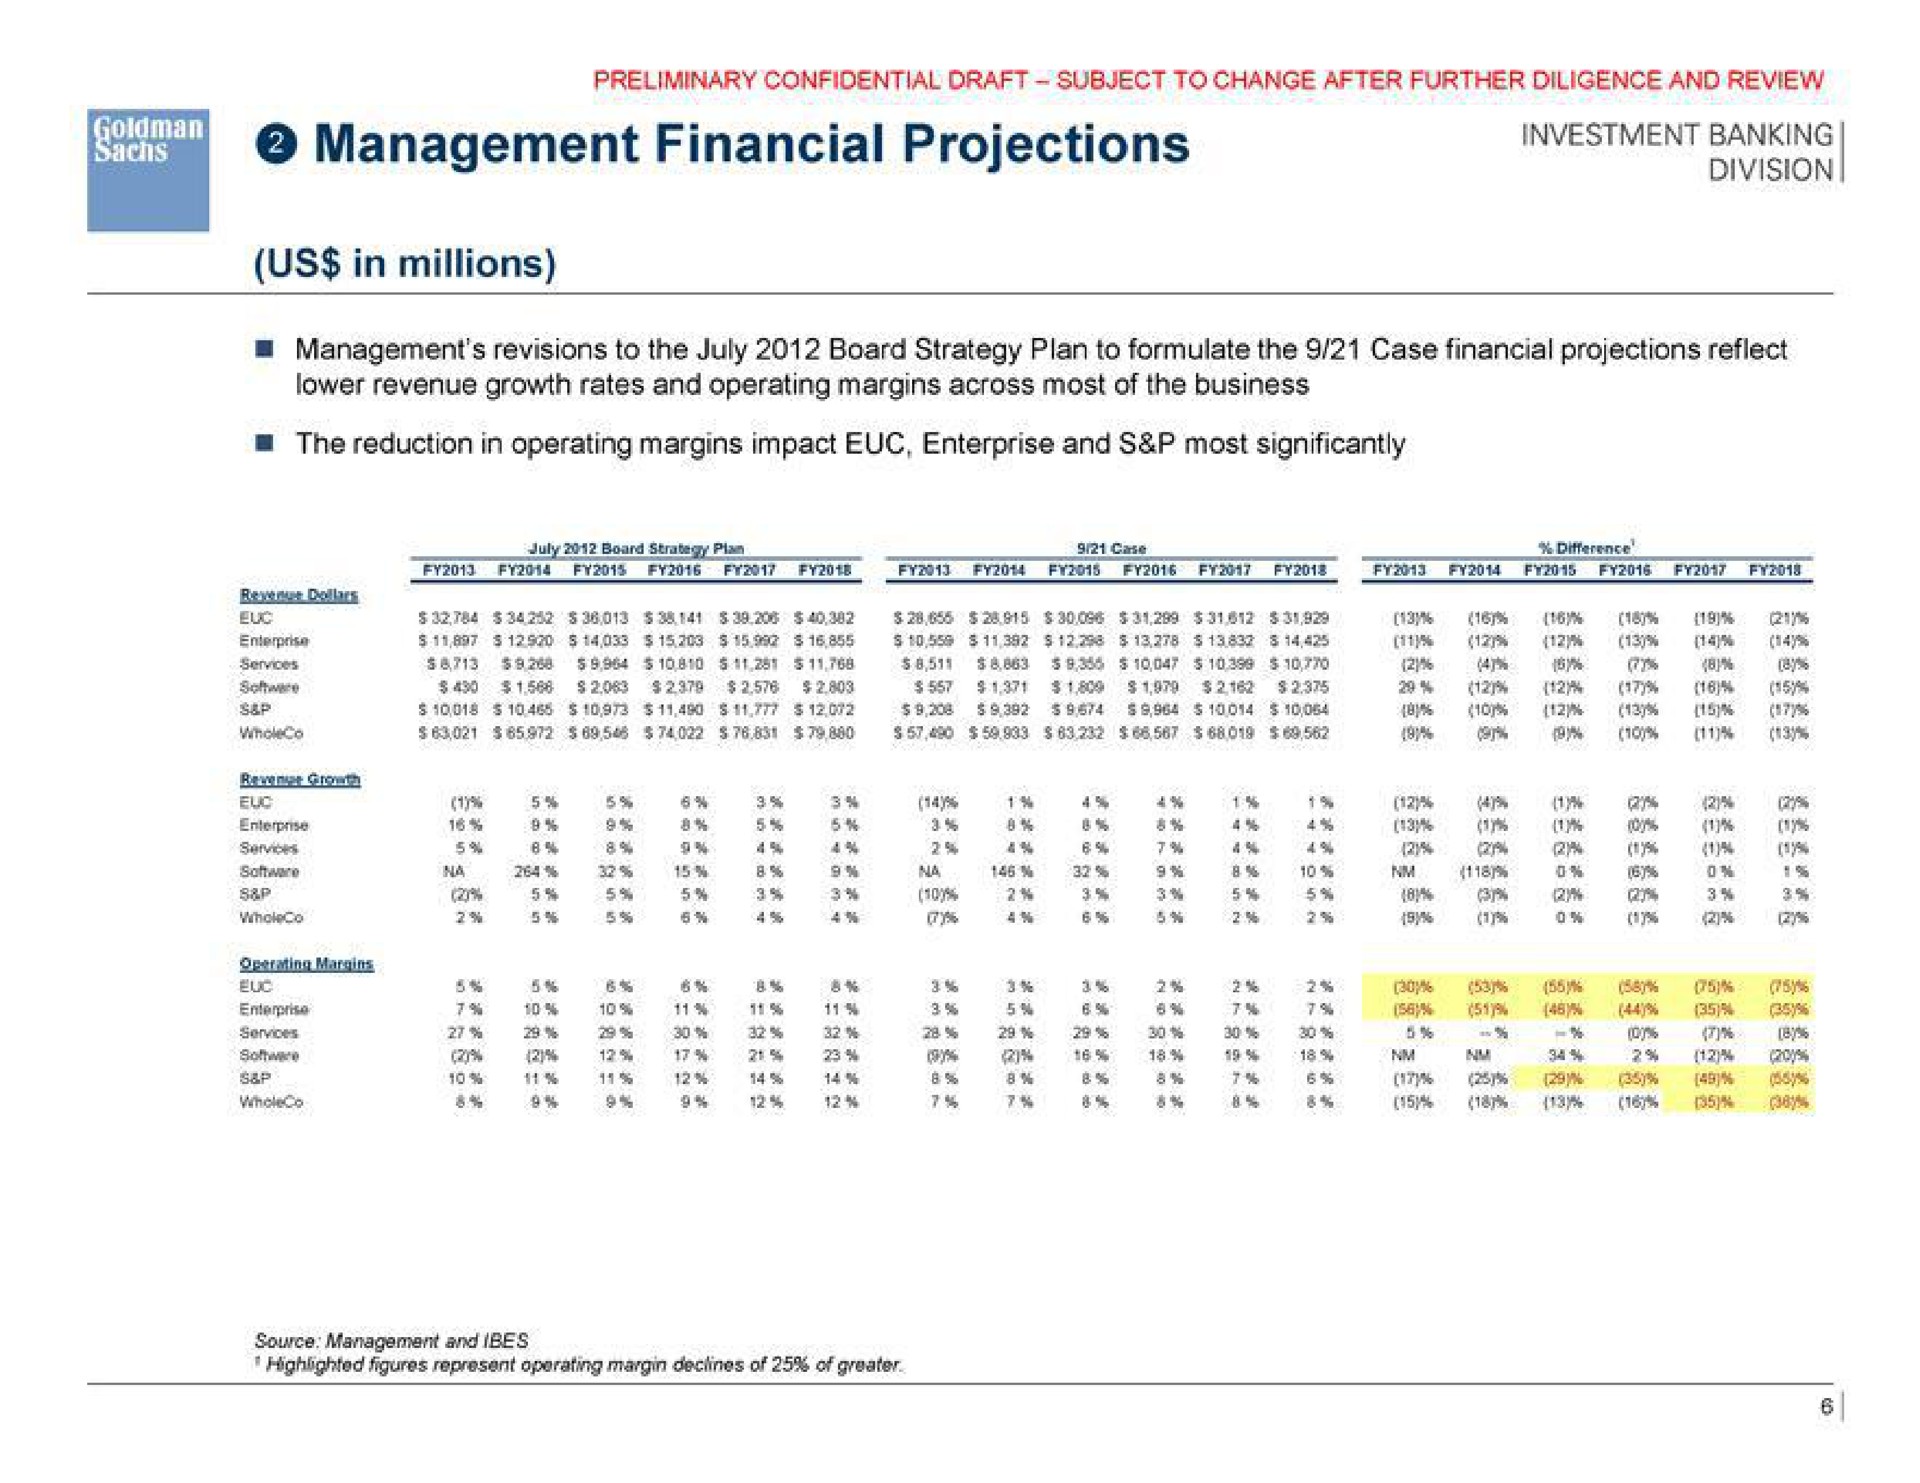 management financial projections us in millions | Goldman Sachs